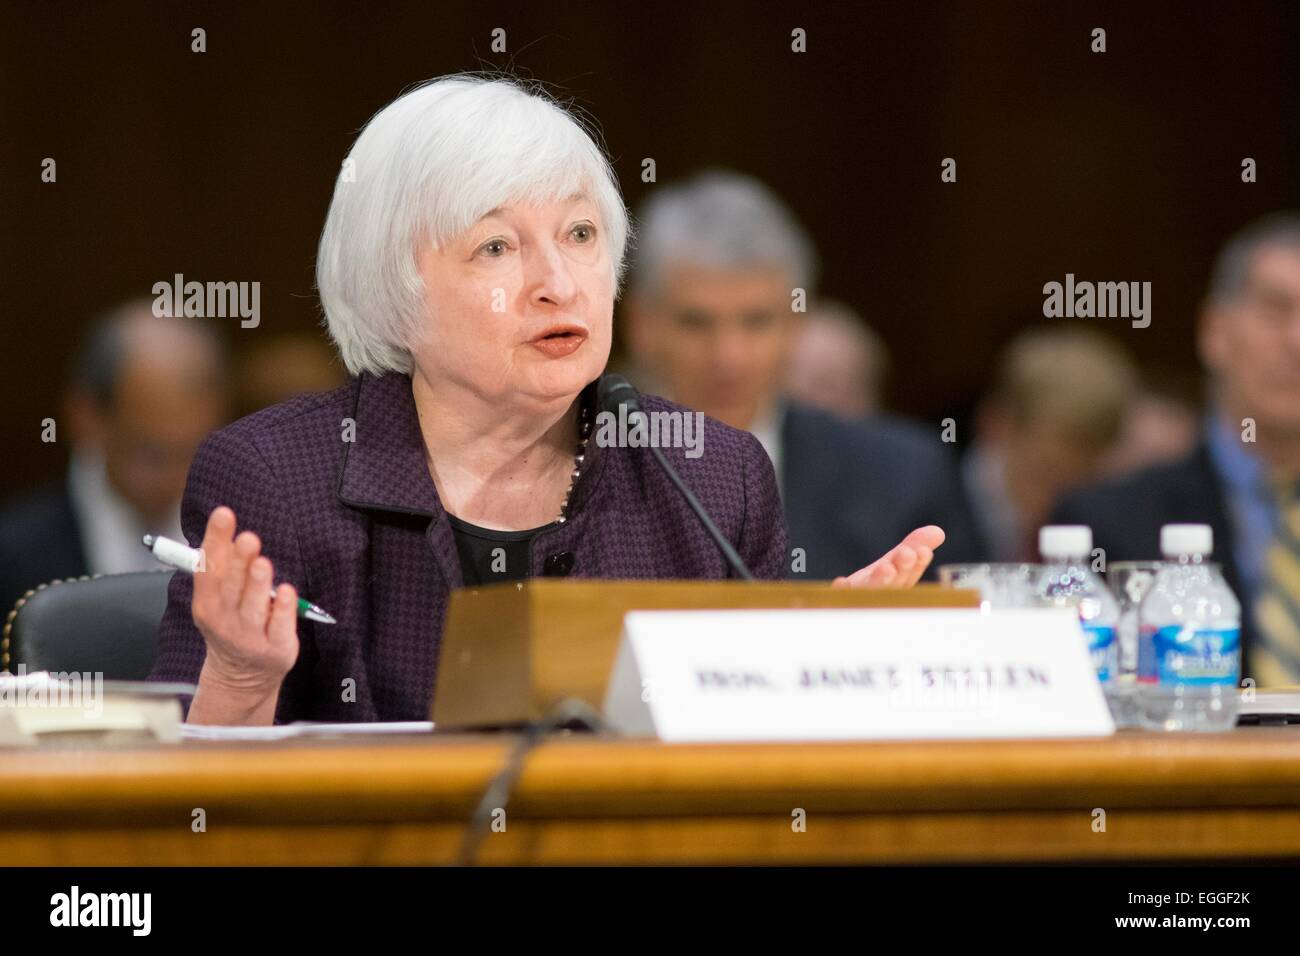 US Federal Reserve Chairwoman Janet Yellen presents the Monetary Policy Report during testimony at the Senate Committee on Banking on Capitol Hill February 24, 2015 in Washington, DC. Stock Photo